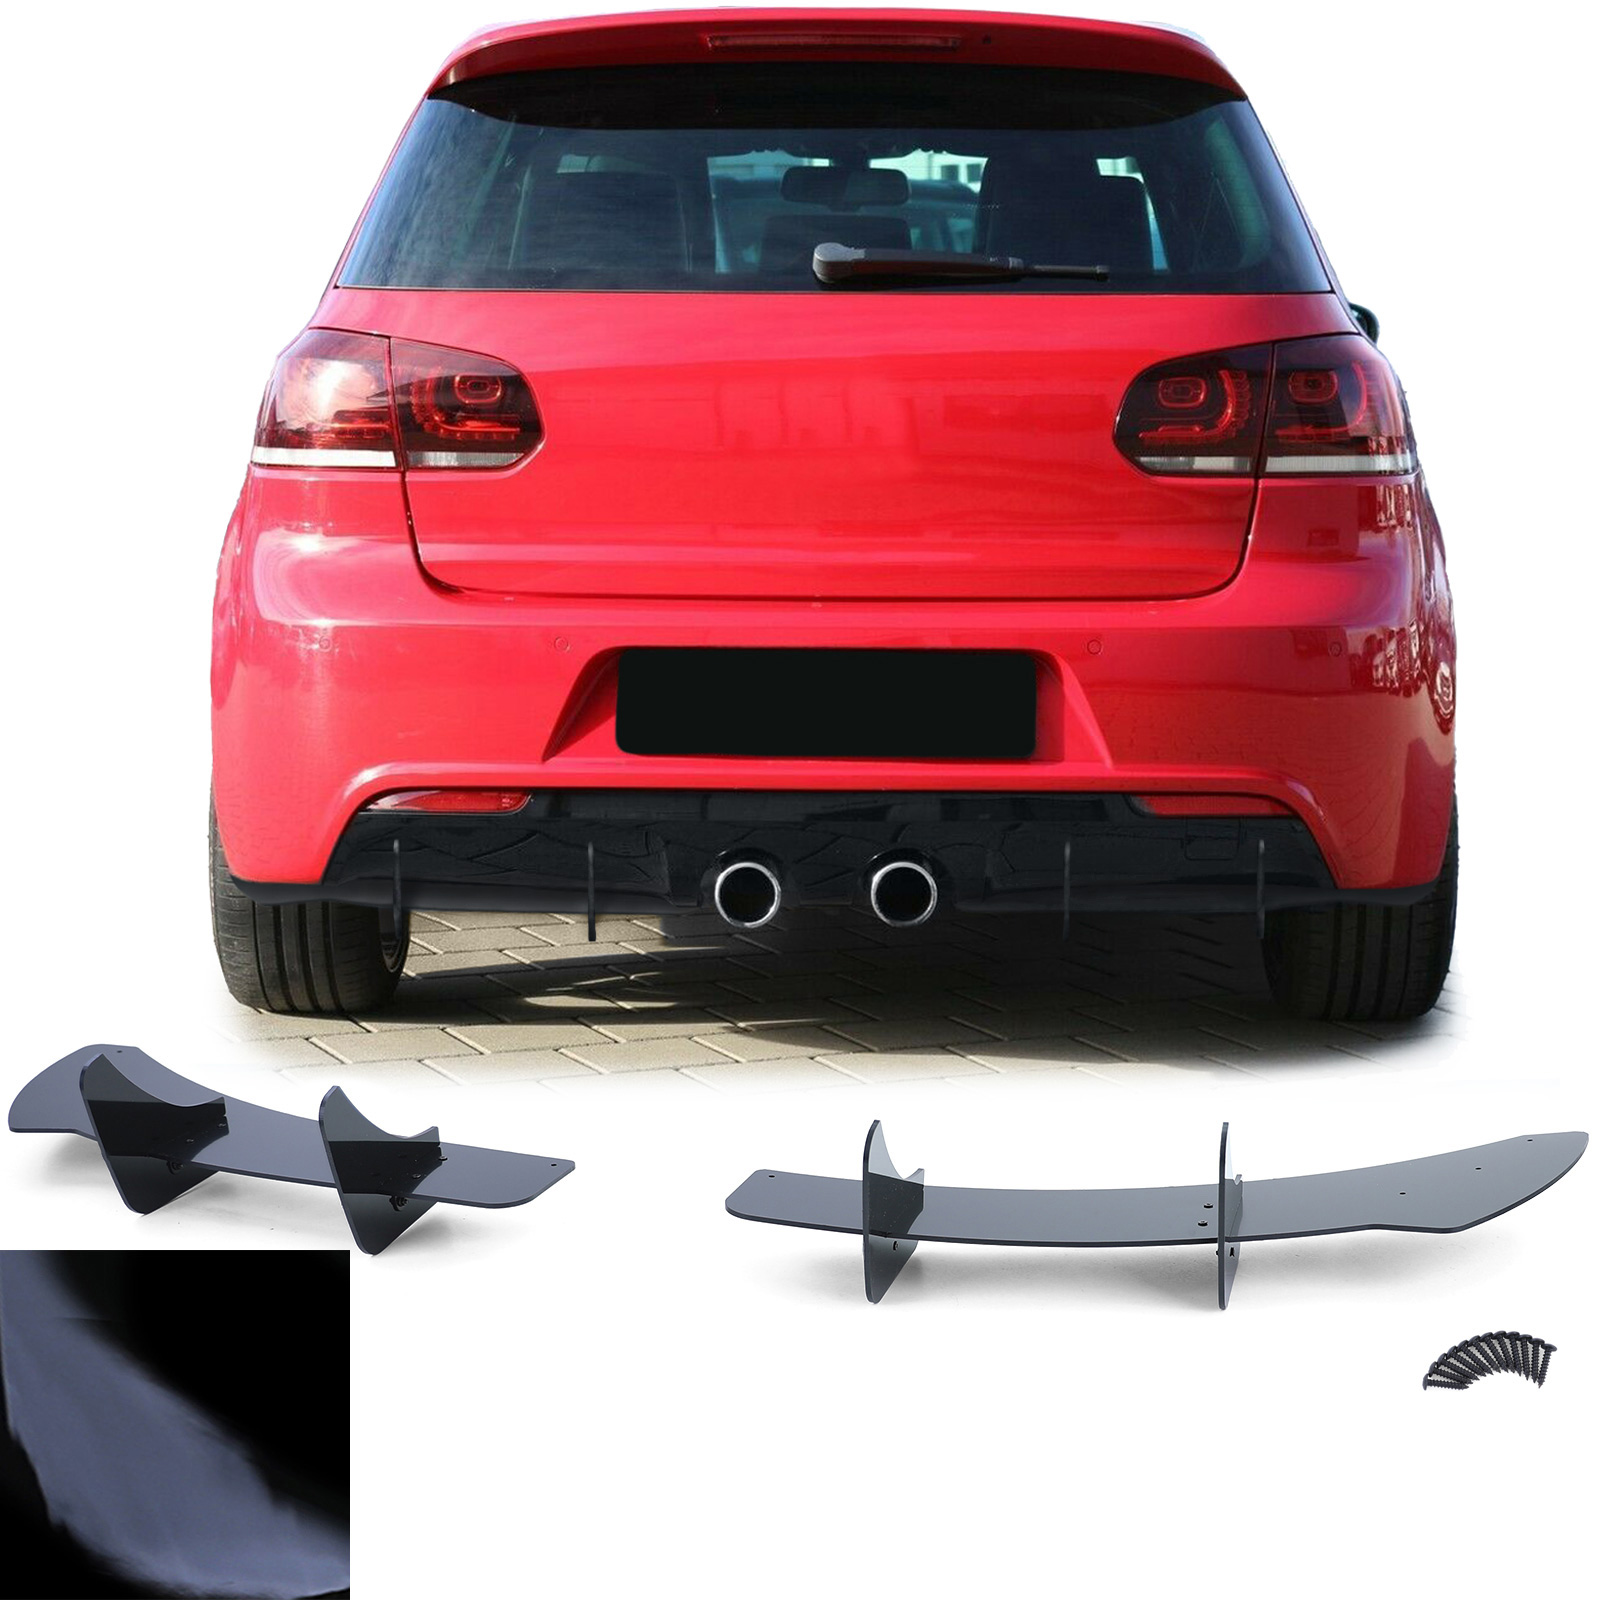 Rear Bumper diffuser addon with ribs / fins / side splitters for VW Golf 6 R20 2008-2013